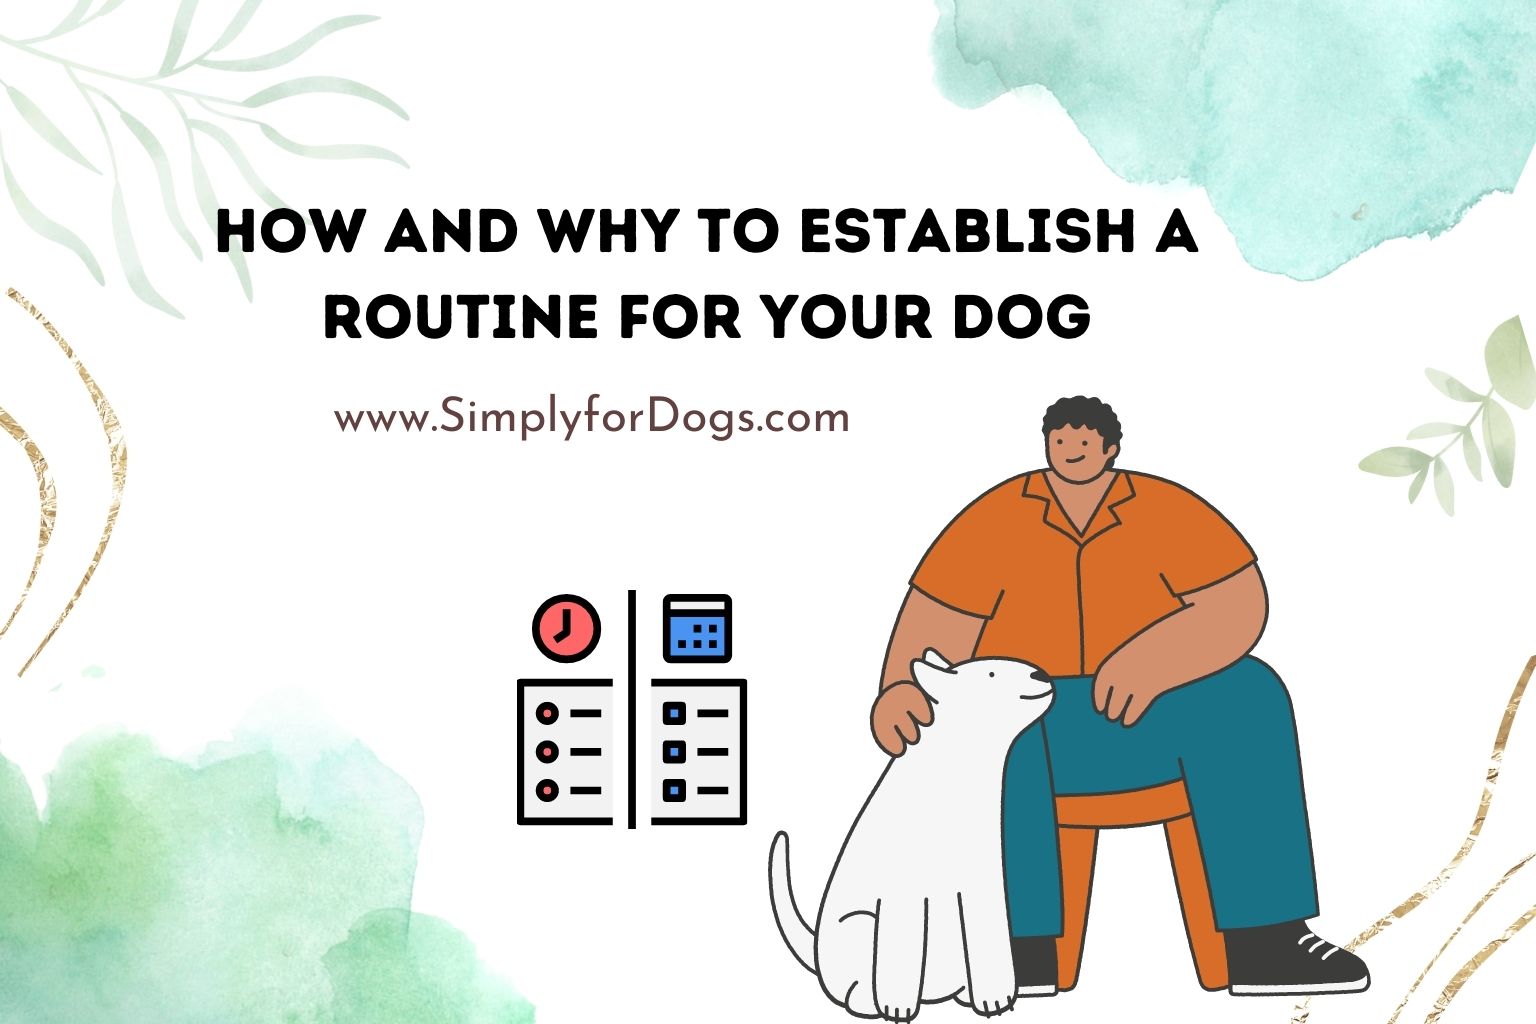 How and Why to Establish a Routine for Your Dog